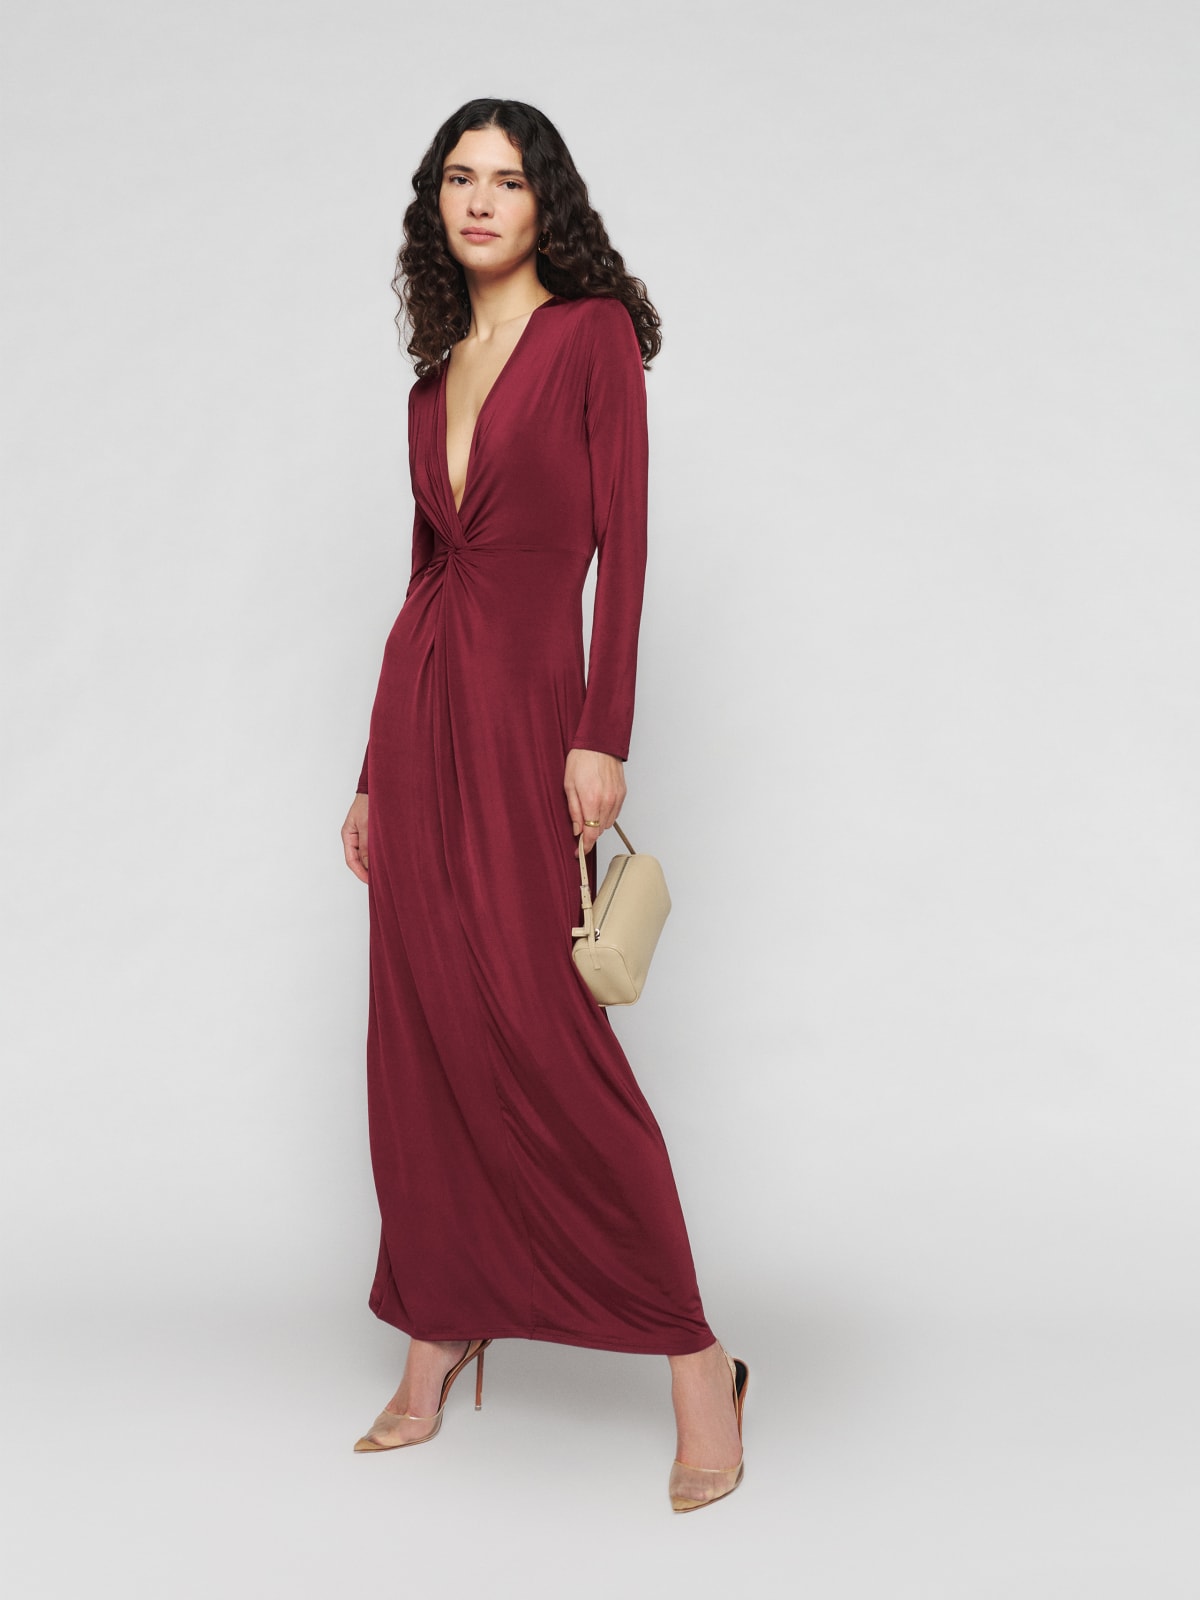 Reformation Elverson maxi dress is a long sleeve, maxi length, fitted dress with a deep V-neck with knot detailing at the waist. It comes in a chianti colour and is made from  Naia™ Renew, a sustainable silk alternative made with renewable wood pulp and repurposed waste. It skims the body and would look amazing for an autumn wedding.